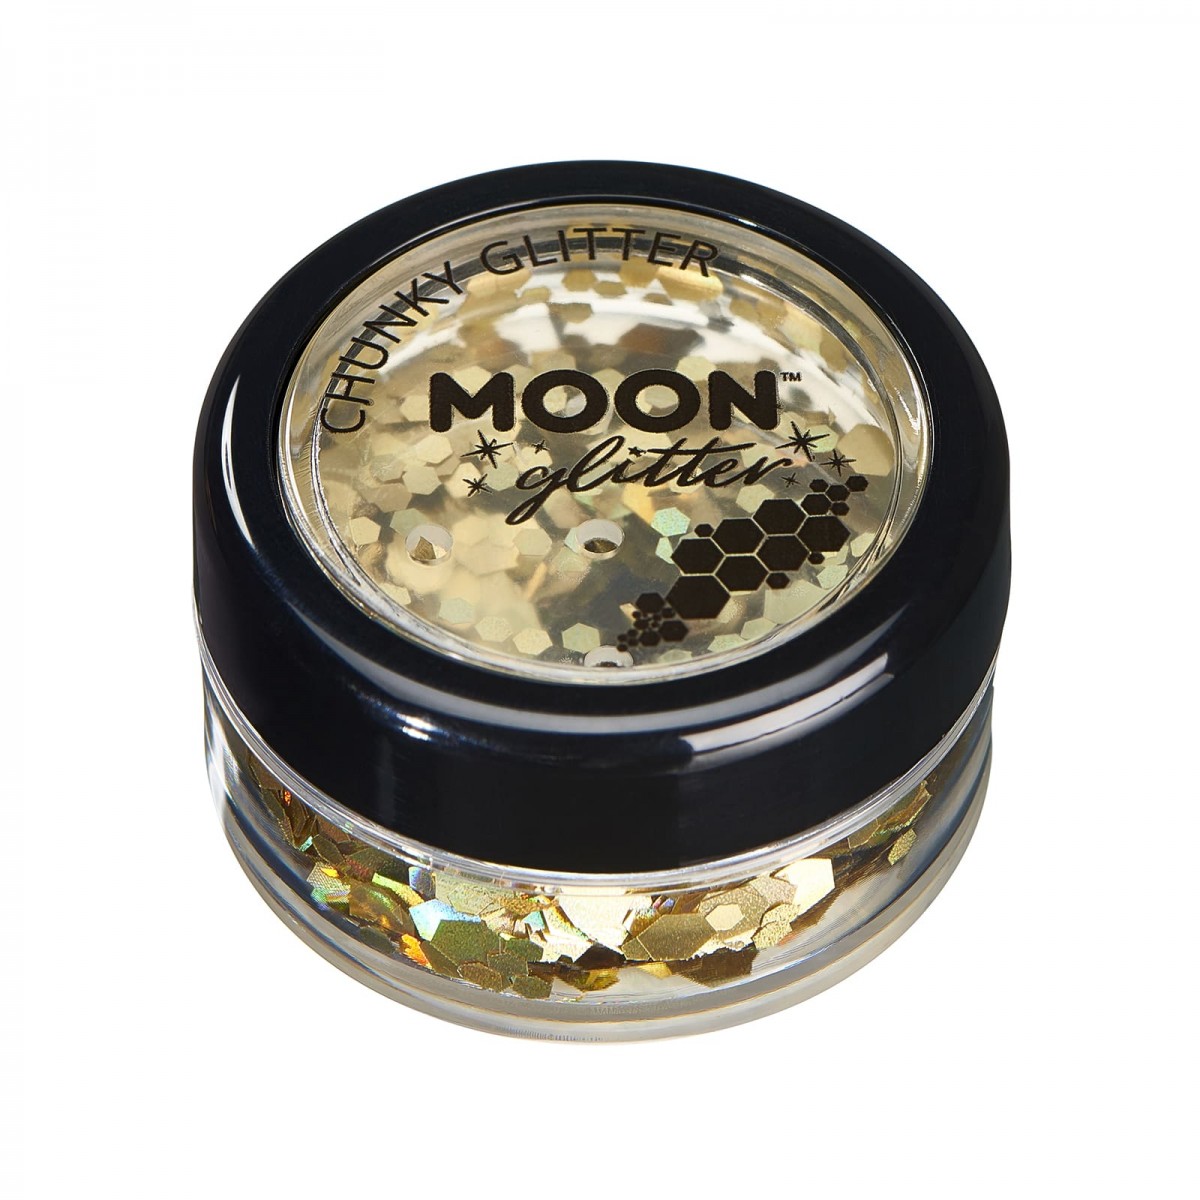 MOON CREATIONS G4 HOLOGRAPHIC CHUNKY GLITTER GOLD 3g